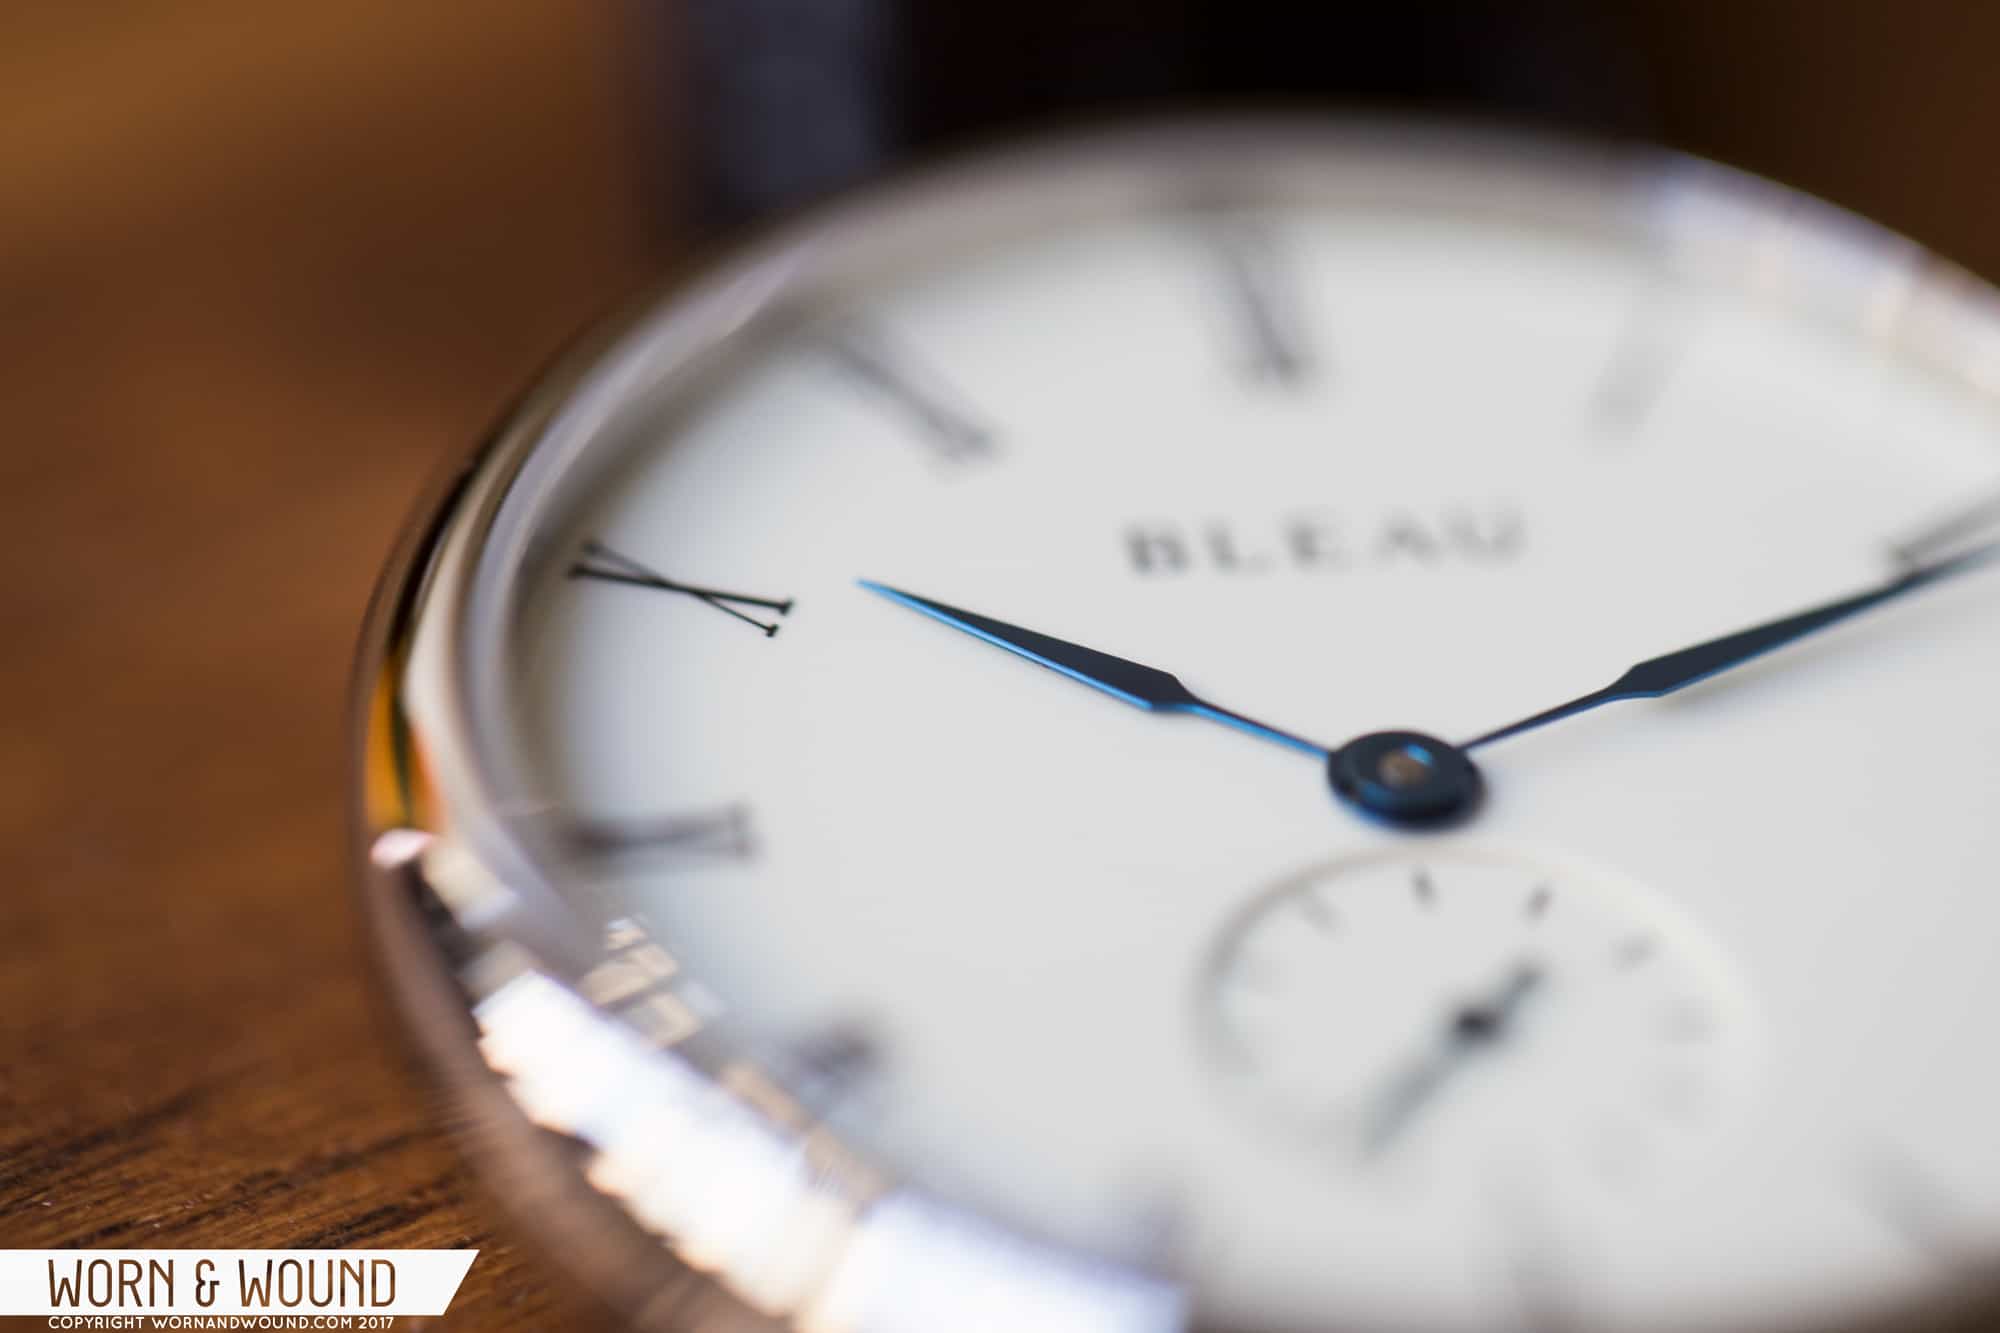 Hands-On with the Bleau Modest Collection - Worn & Wound